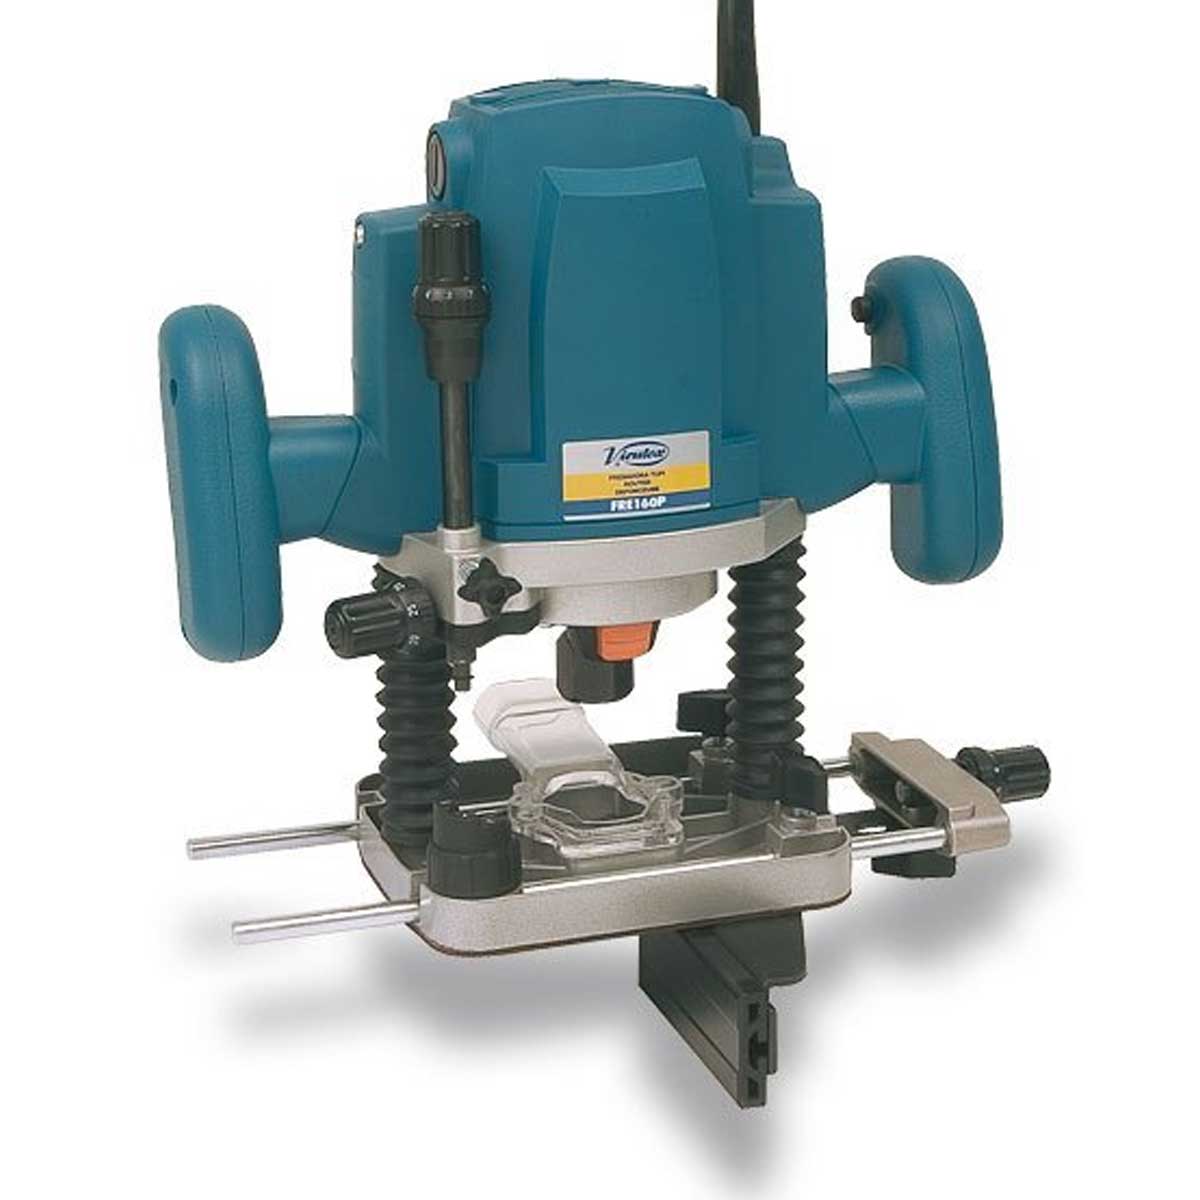 European Hand Router Manufacturers, Suppliers in Maharashtra